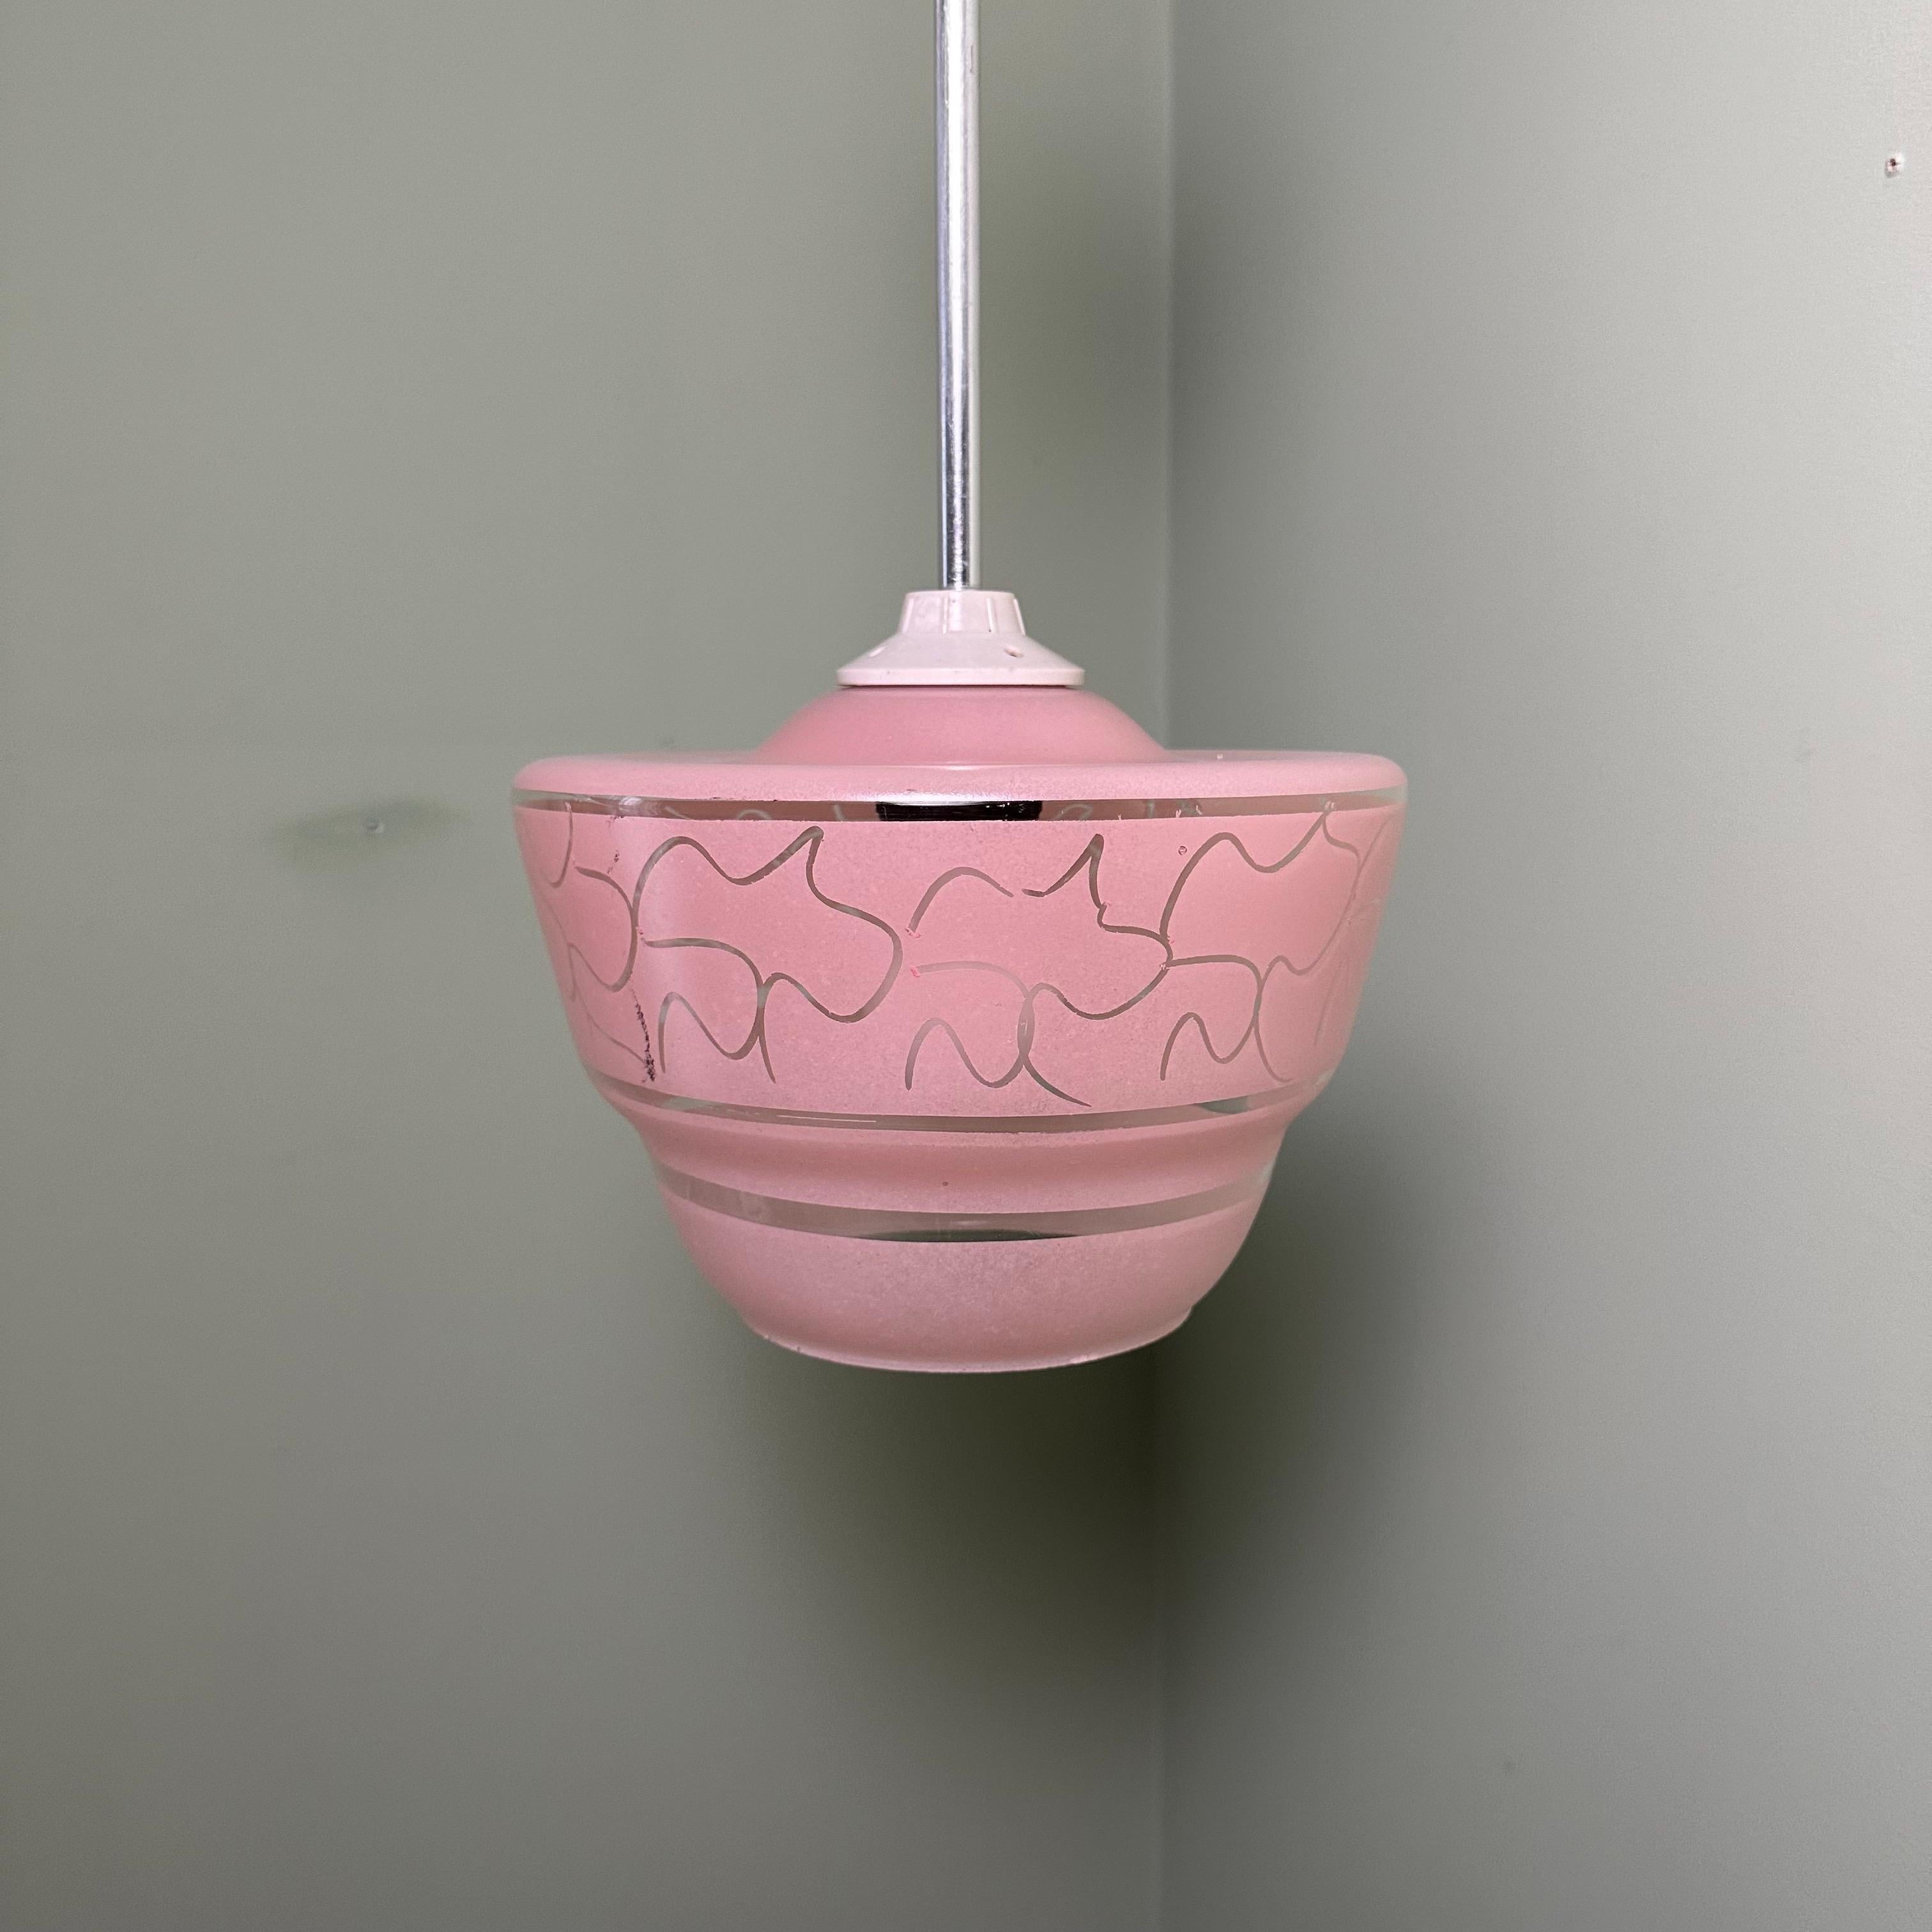 A charming vintage midcentury pendant light in glass. Features a curving, looping, knotted, abstract, geometric pattern etched into an applied bubblegum pink frosted finish, broken up by three bands of clear glass. Recalls the appearance of flying